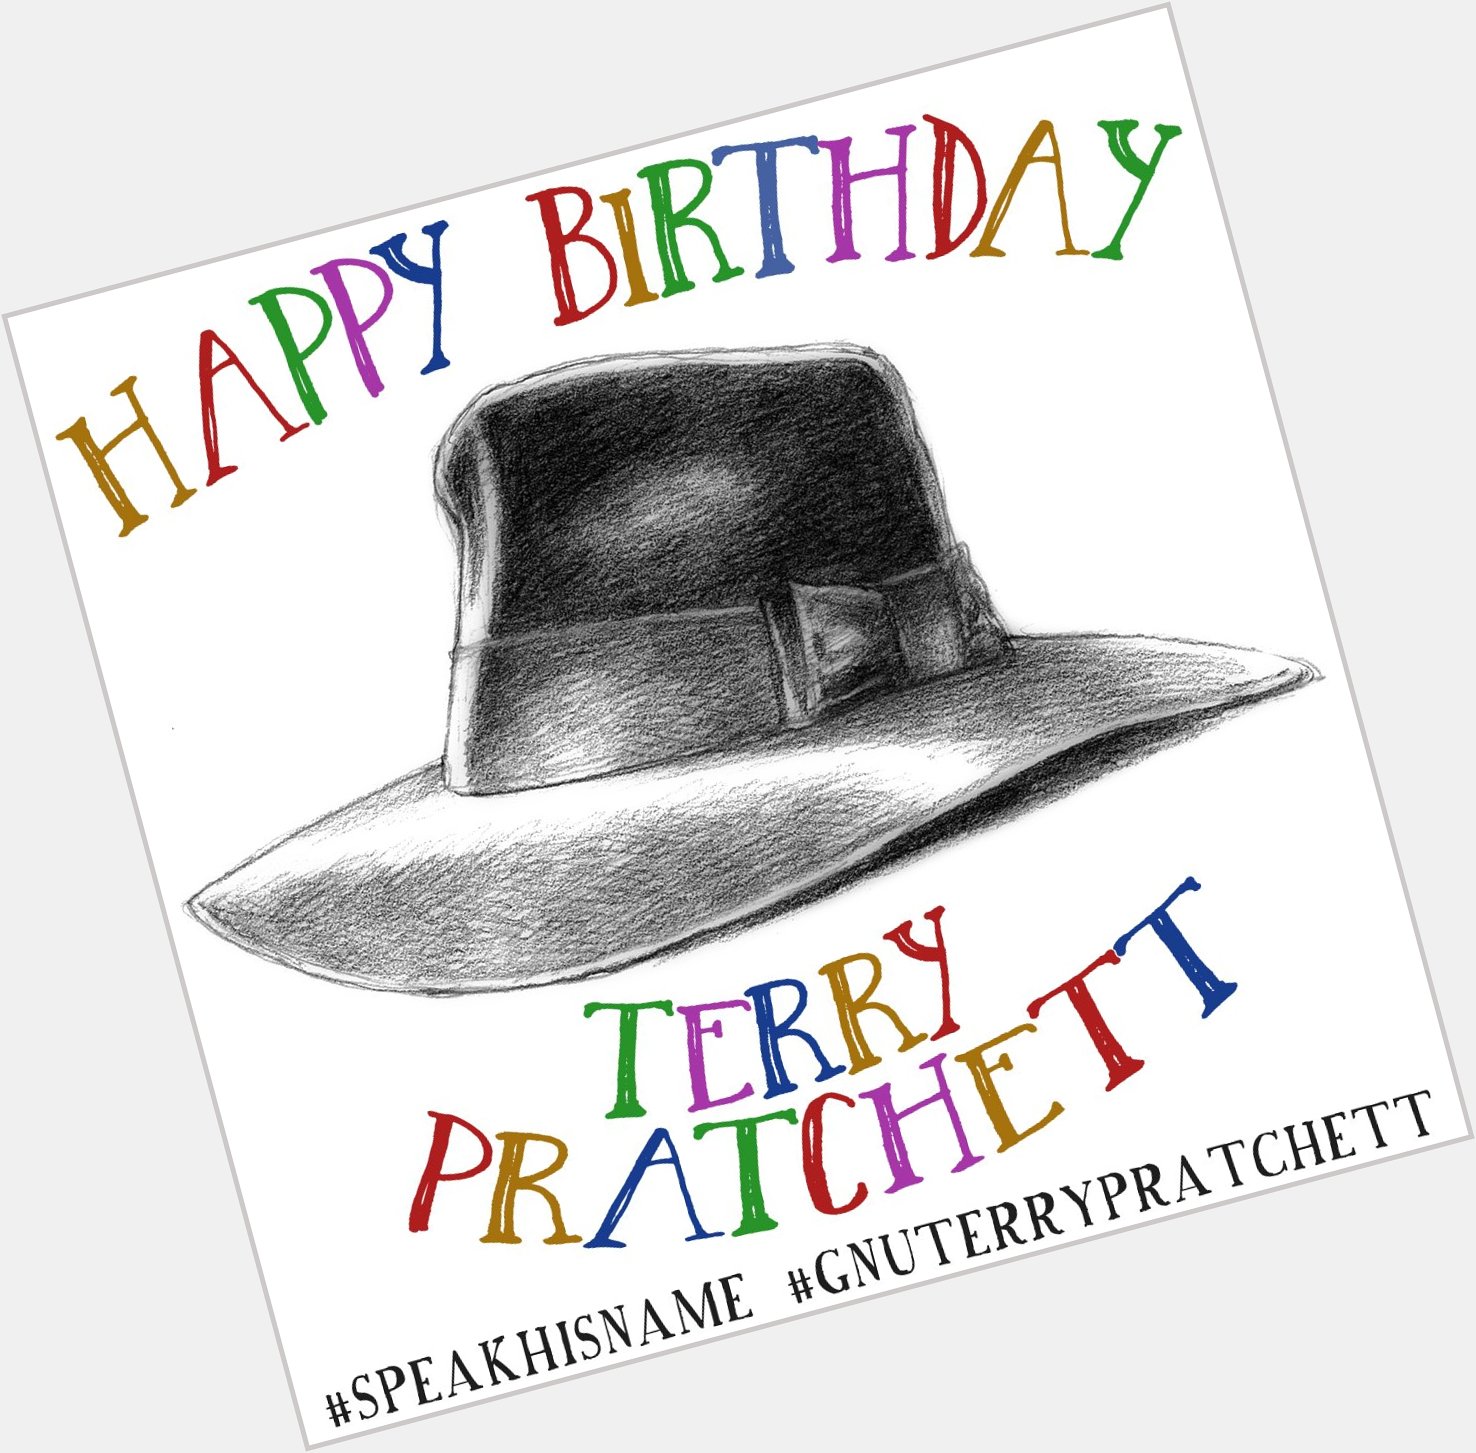 Happy Birthday Terry Pratchett - our latest newsletter pays tribute to the man in the hat -  